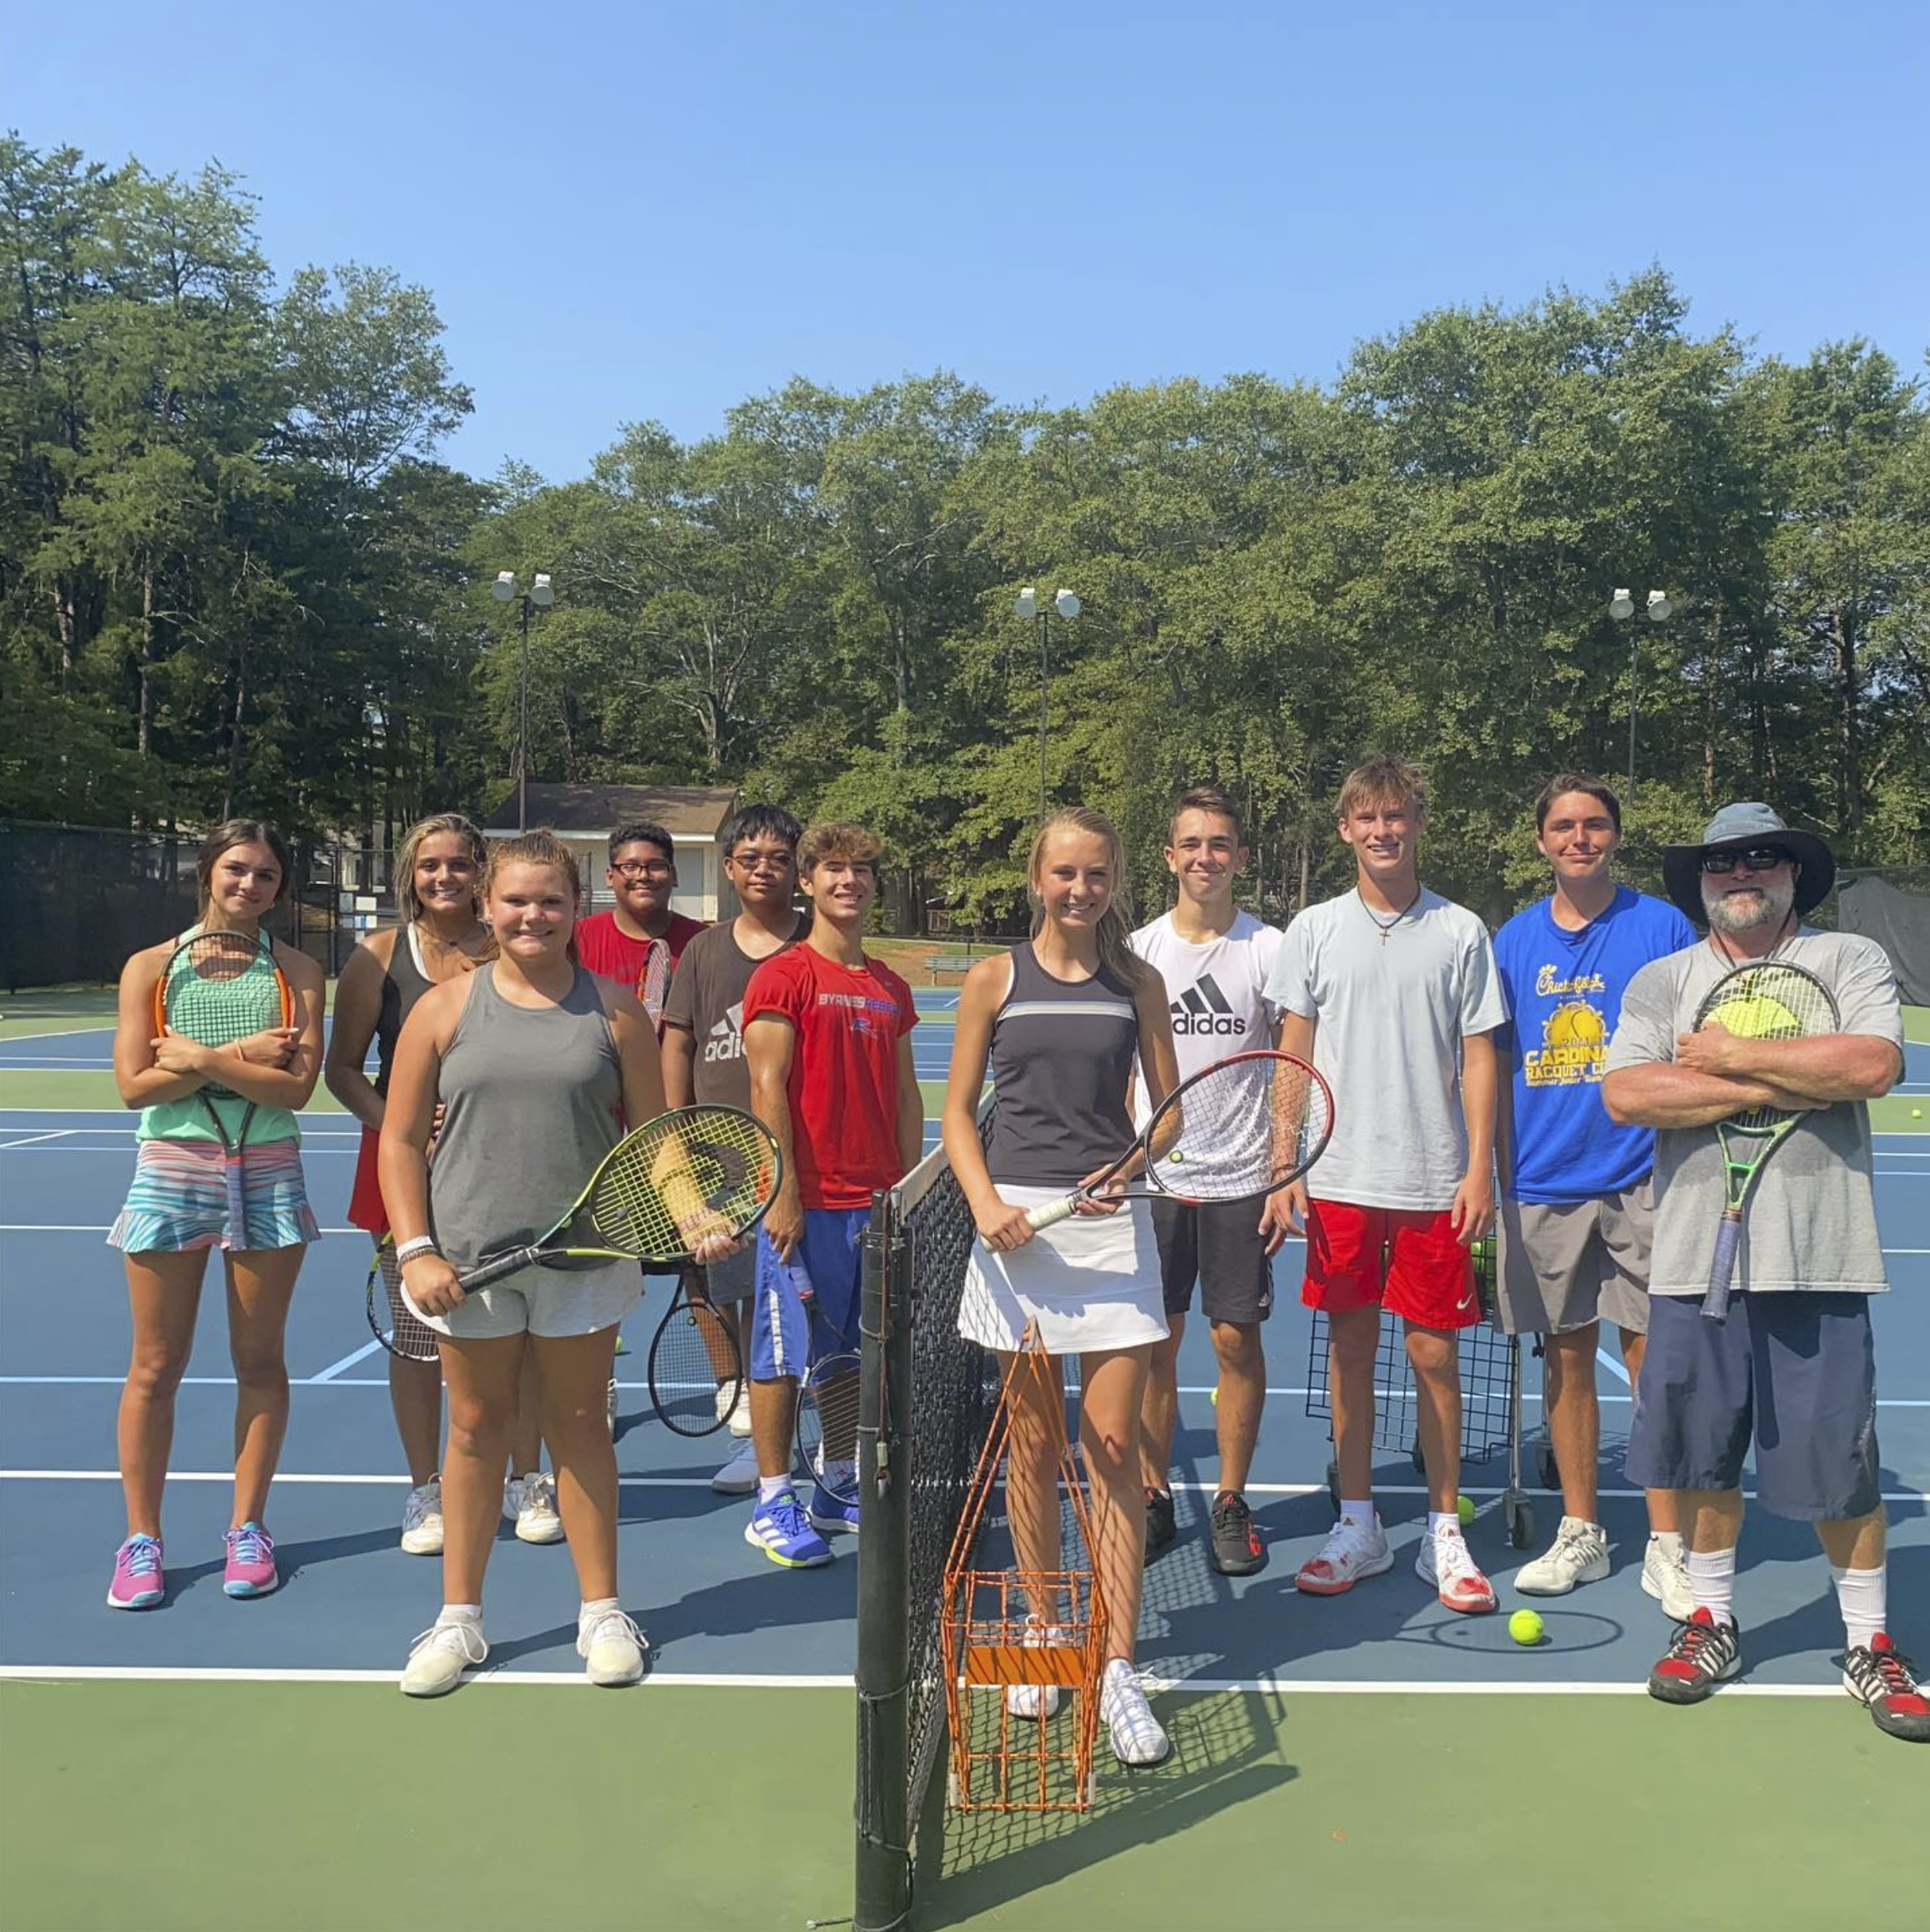 group photo of tennis players 2021